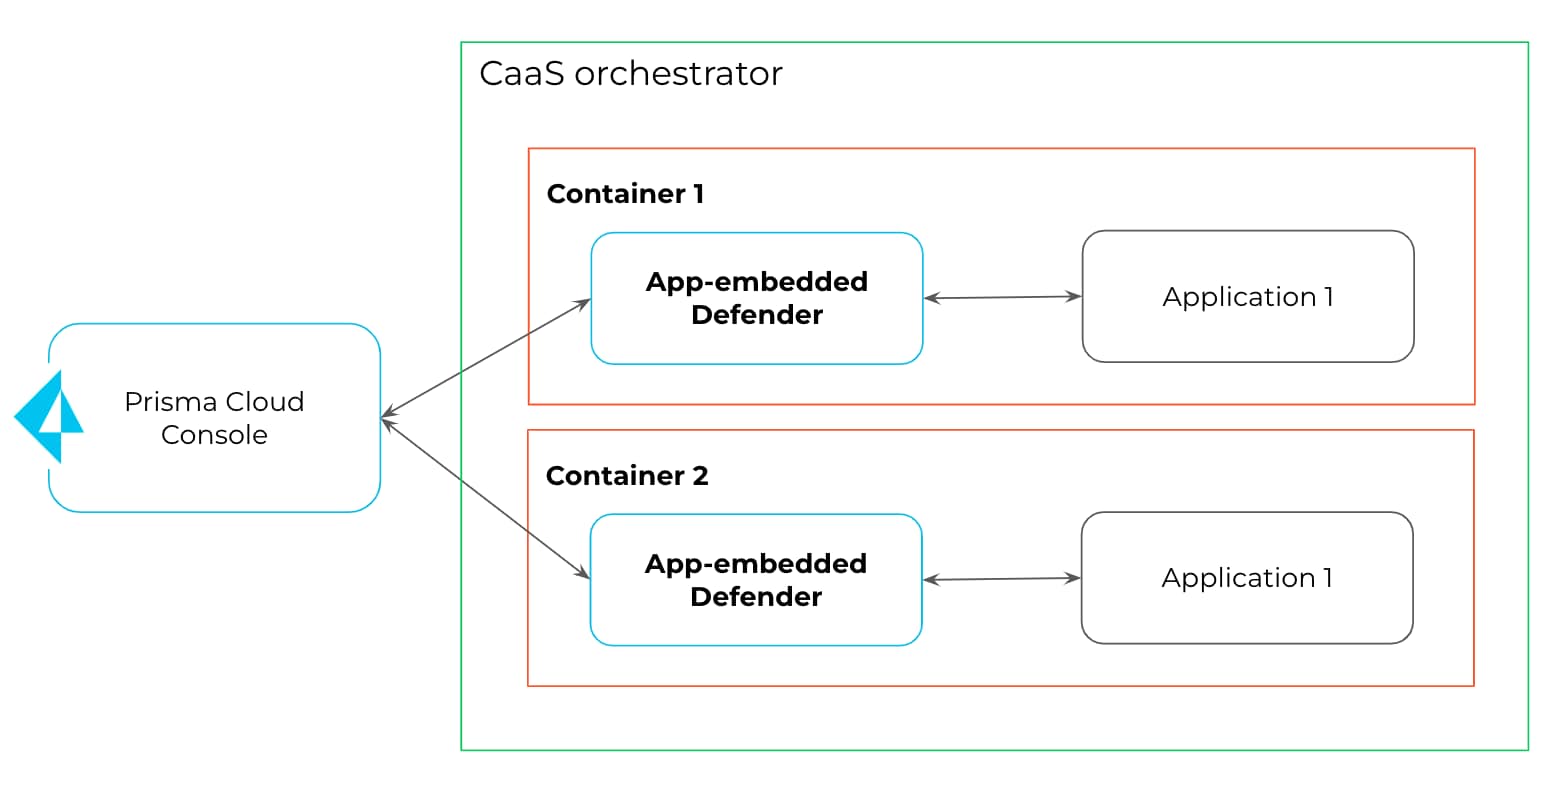 App-embedded Defender running from within the container or application